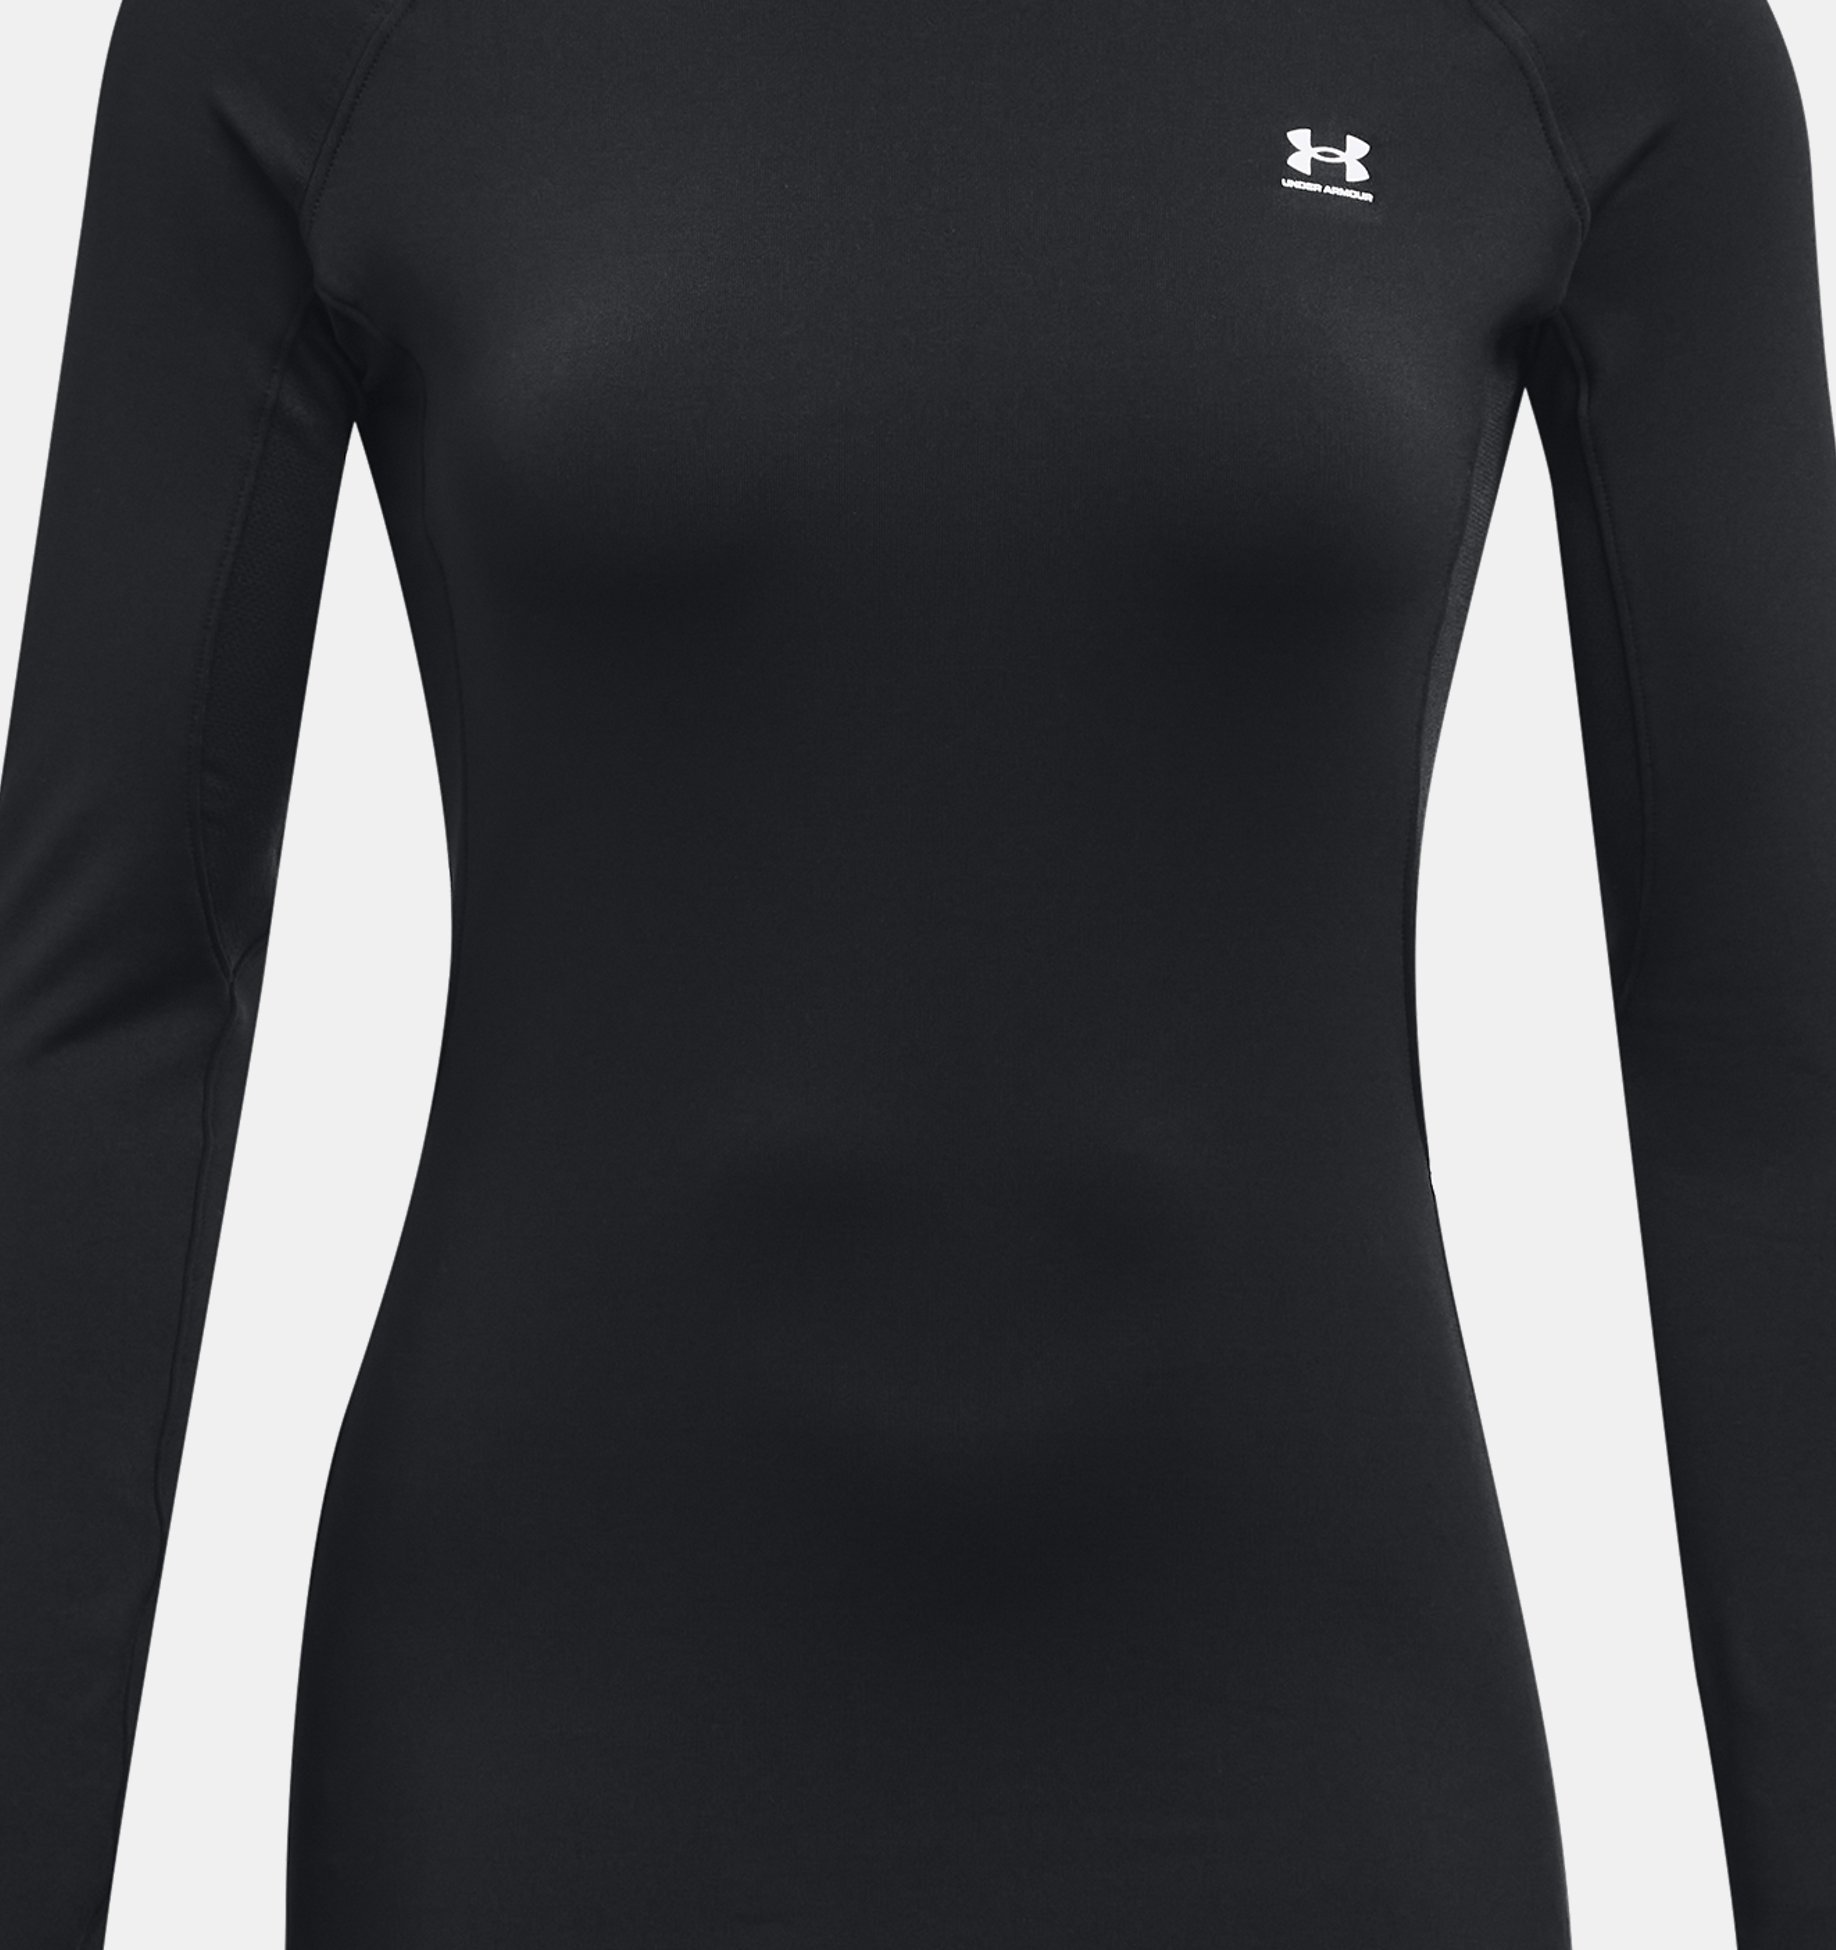 UNDER ARMOUR WOMEN'S Authentic Coldgear Fitted Tight Large Black/Blue  1240222 $31.49 - PicClick